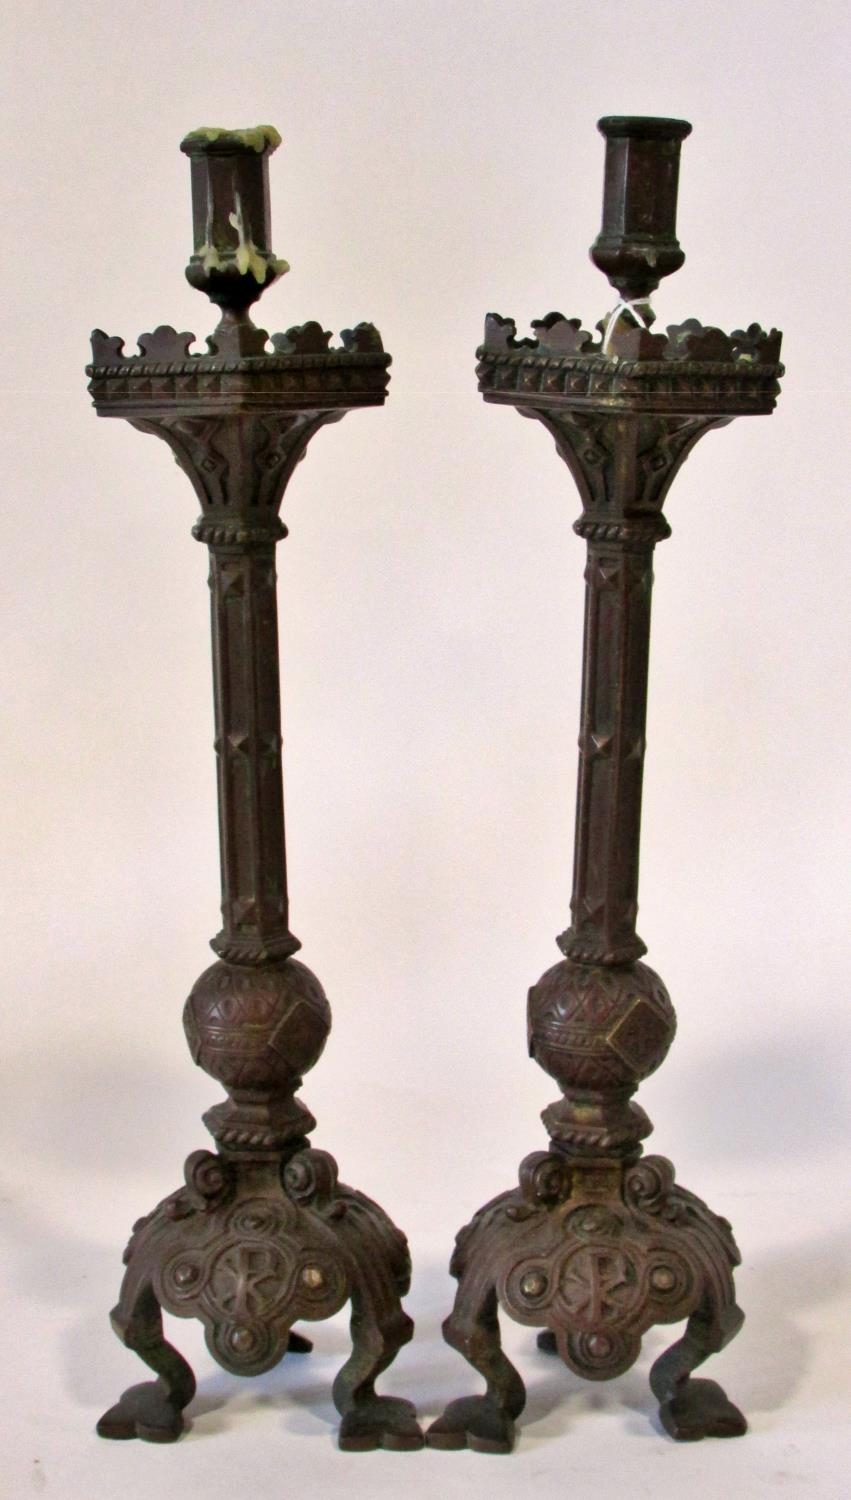 A pair of 19th century continental bronze ecclesiastical candlesticks, with crucifix and other - Image 2 of 5